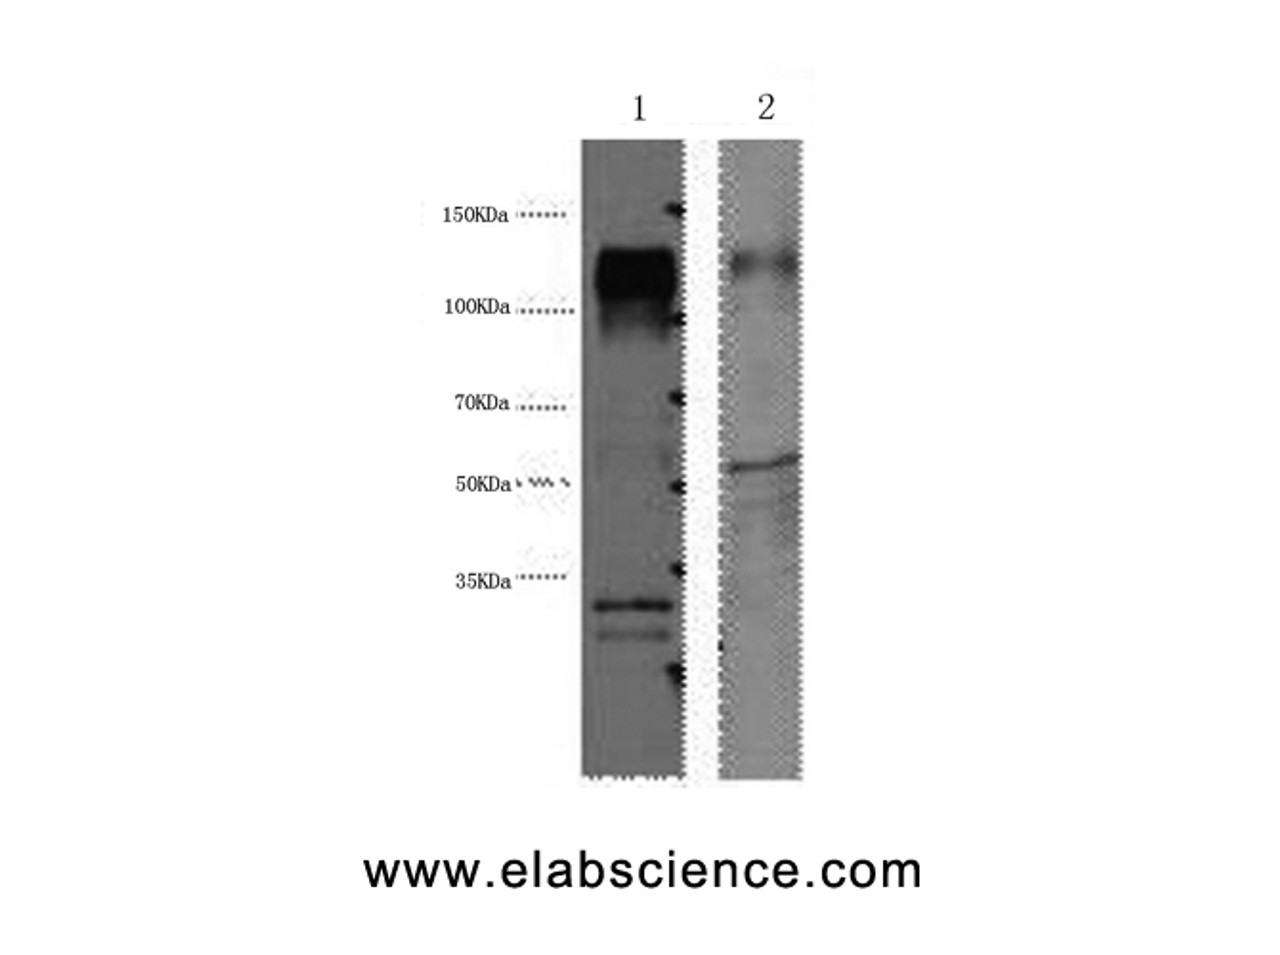 Western Blot analysis of 1) Hela, 2) Mouse brain using ERBB2 Monoclonal Antibody at dilution of 1:4000.